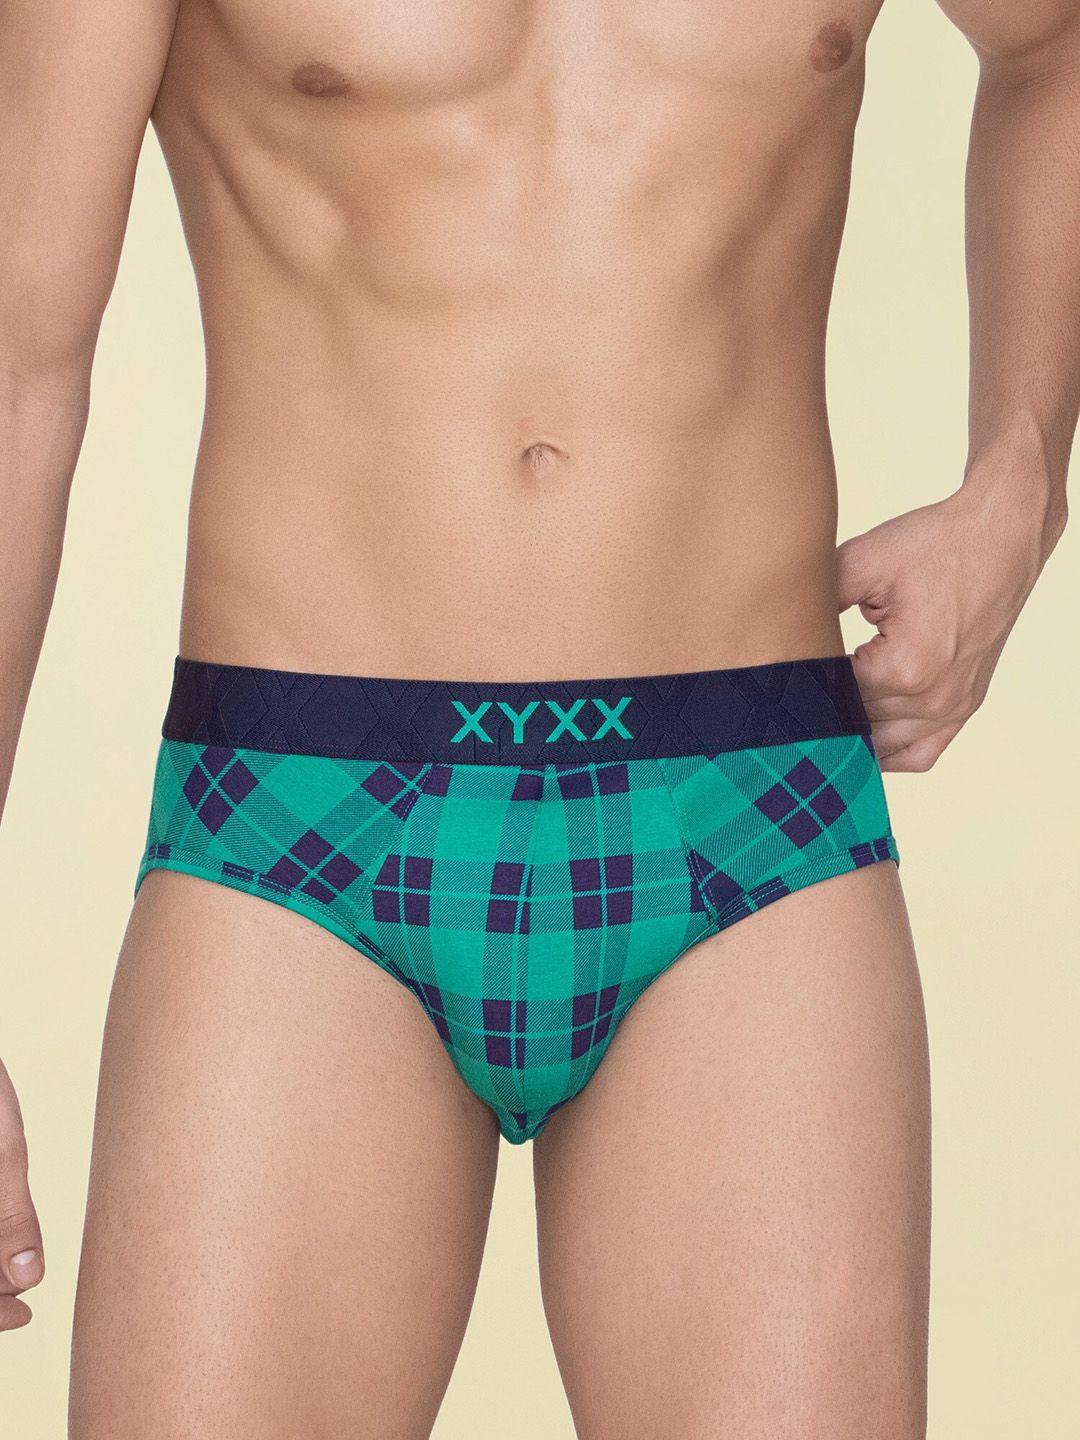 xyxx-men-checkmate-printed-briefs-xybrf184